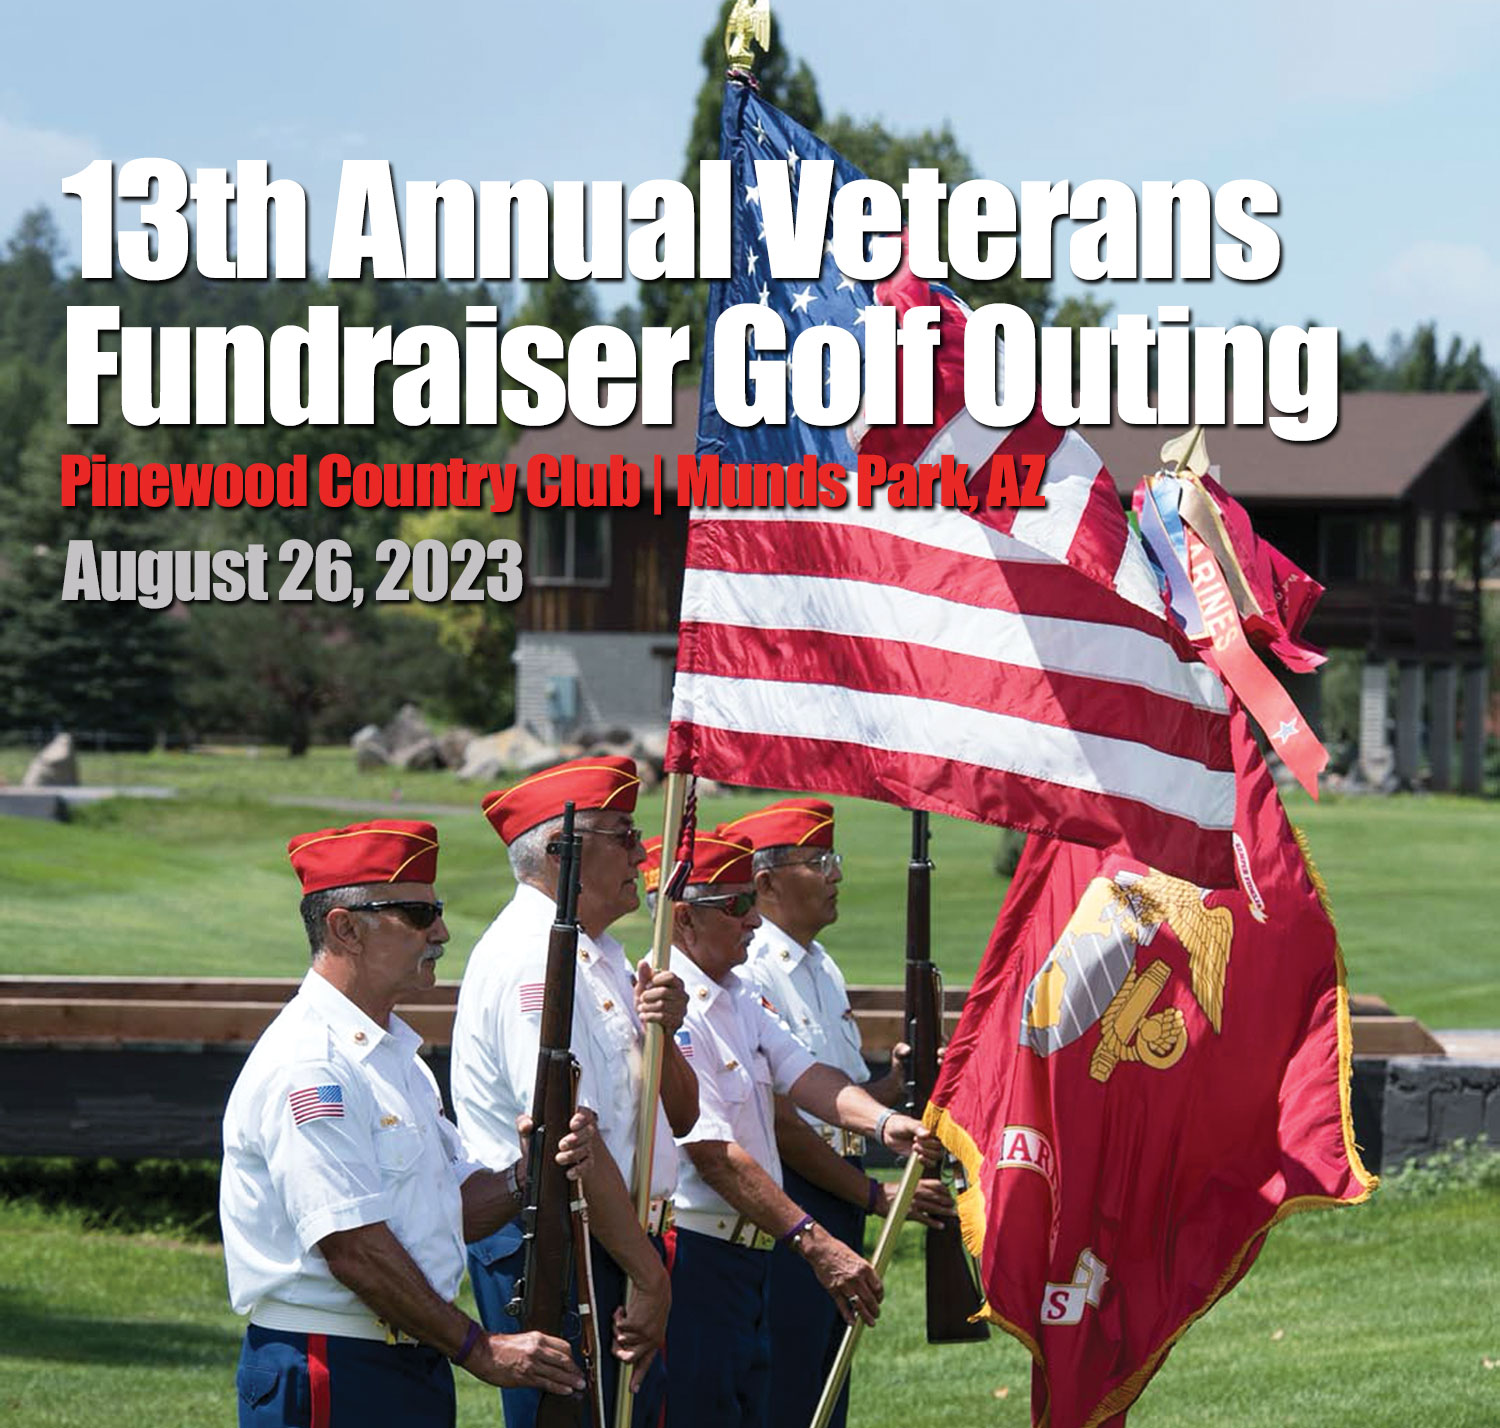 13th Annual Veterans Fundraiser Golf Outing